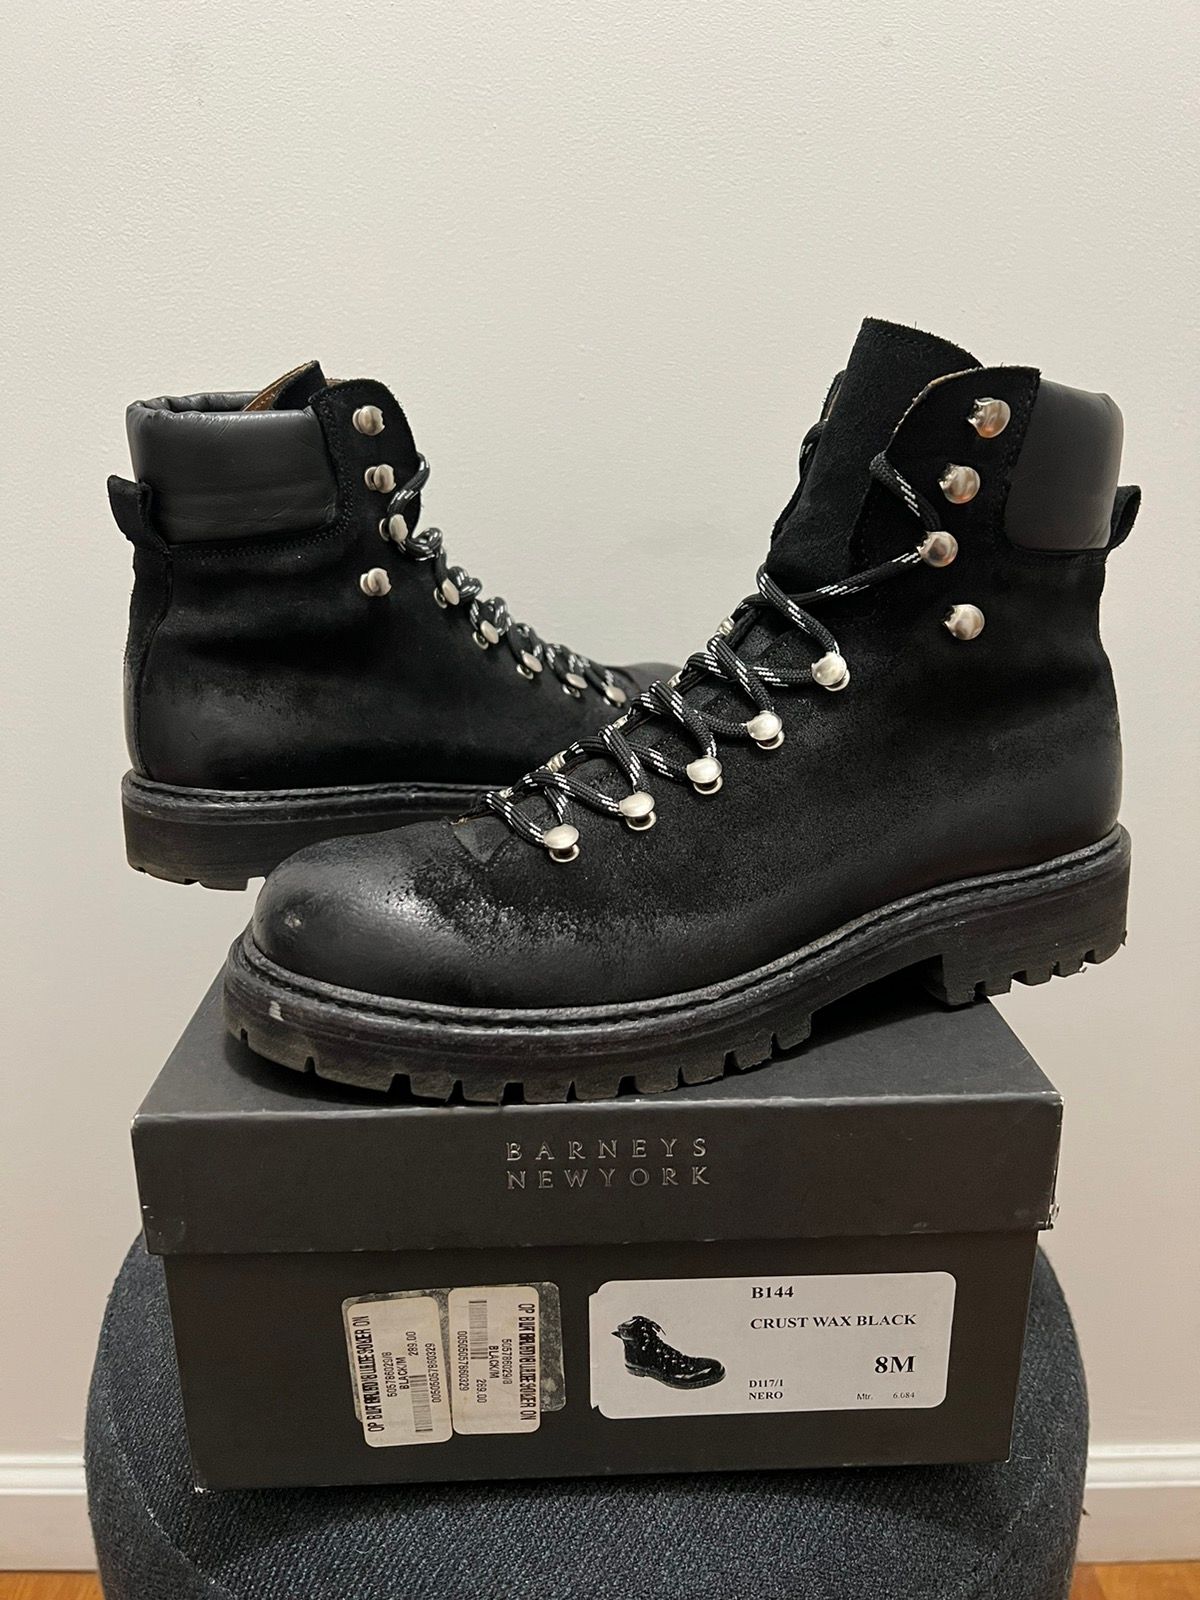 Barneys New York Vintage Barney’s New York Boots Size US 9.5 / EU 42-43 - 1 Preview